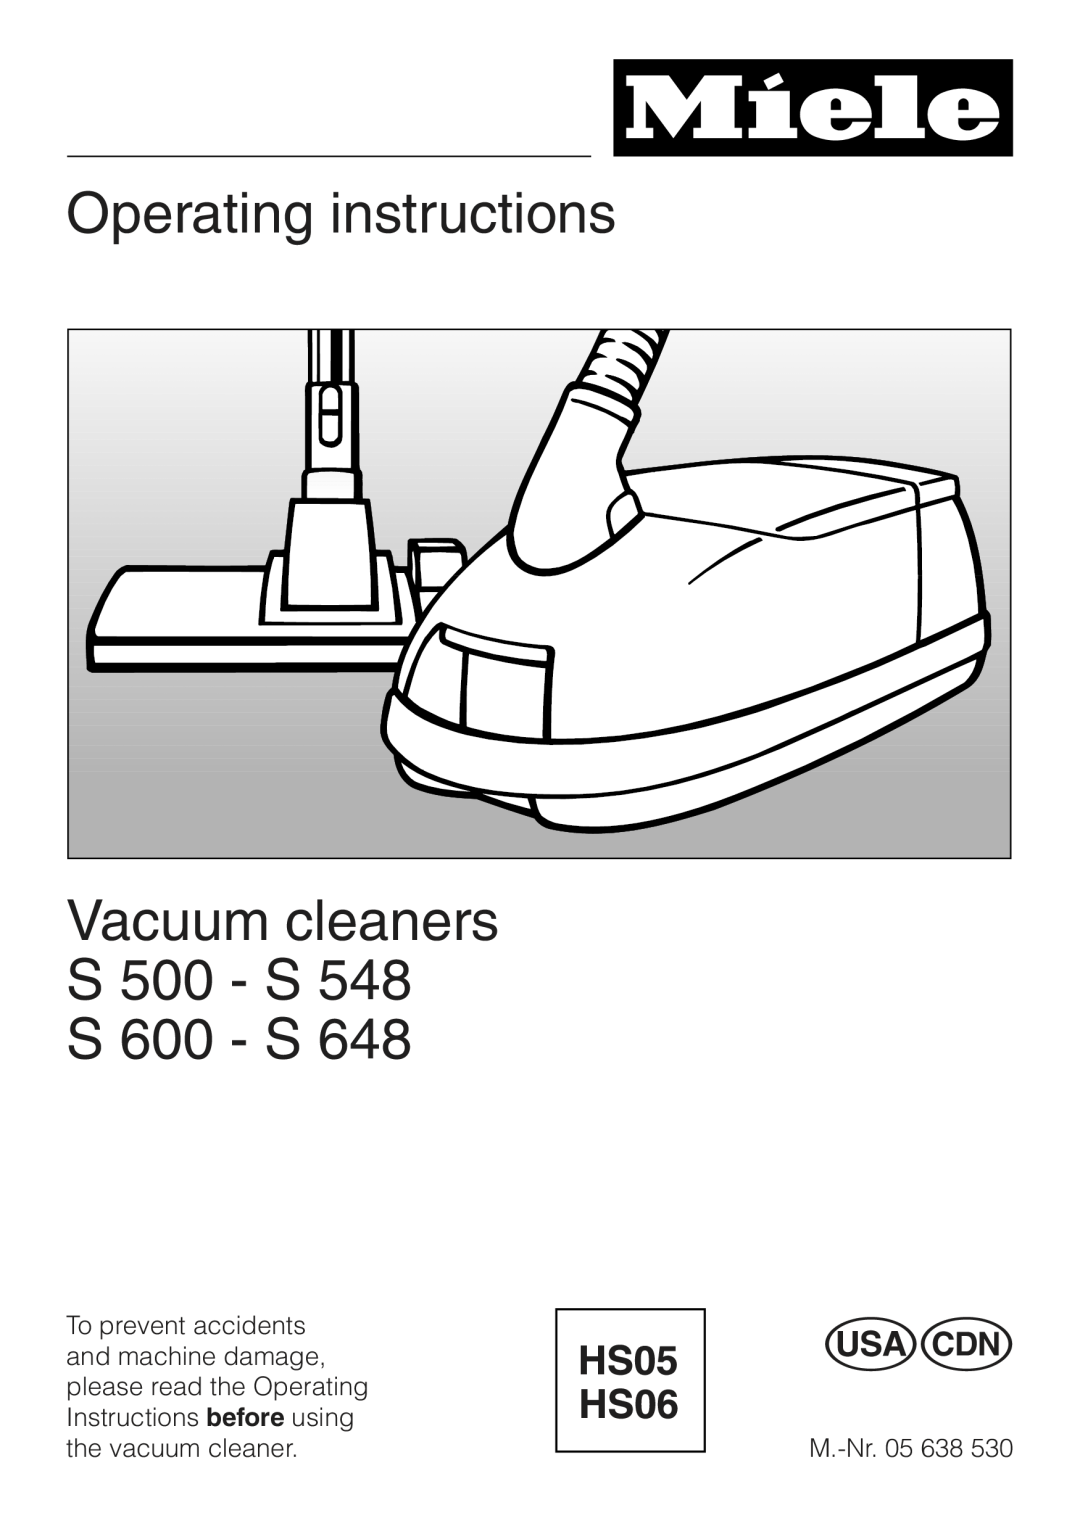 Miele S 600 - S 648, S 500 - S 548 manual Operating instructions, Vacuum cleaners S 500 - S S 600 - S 